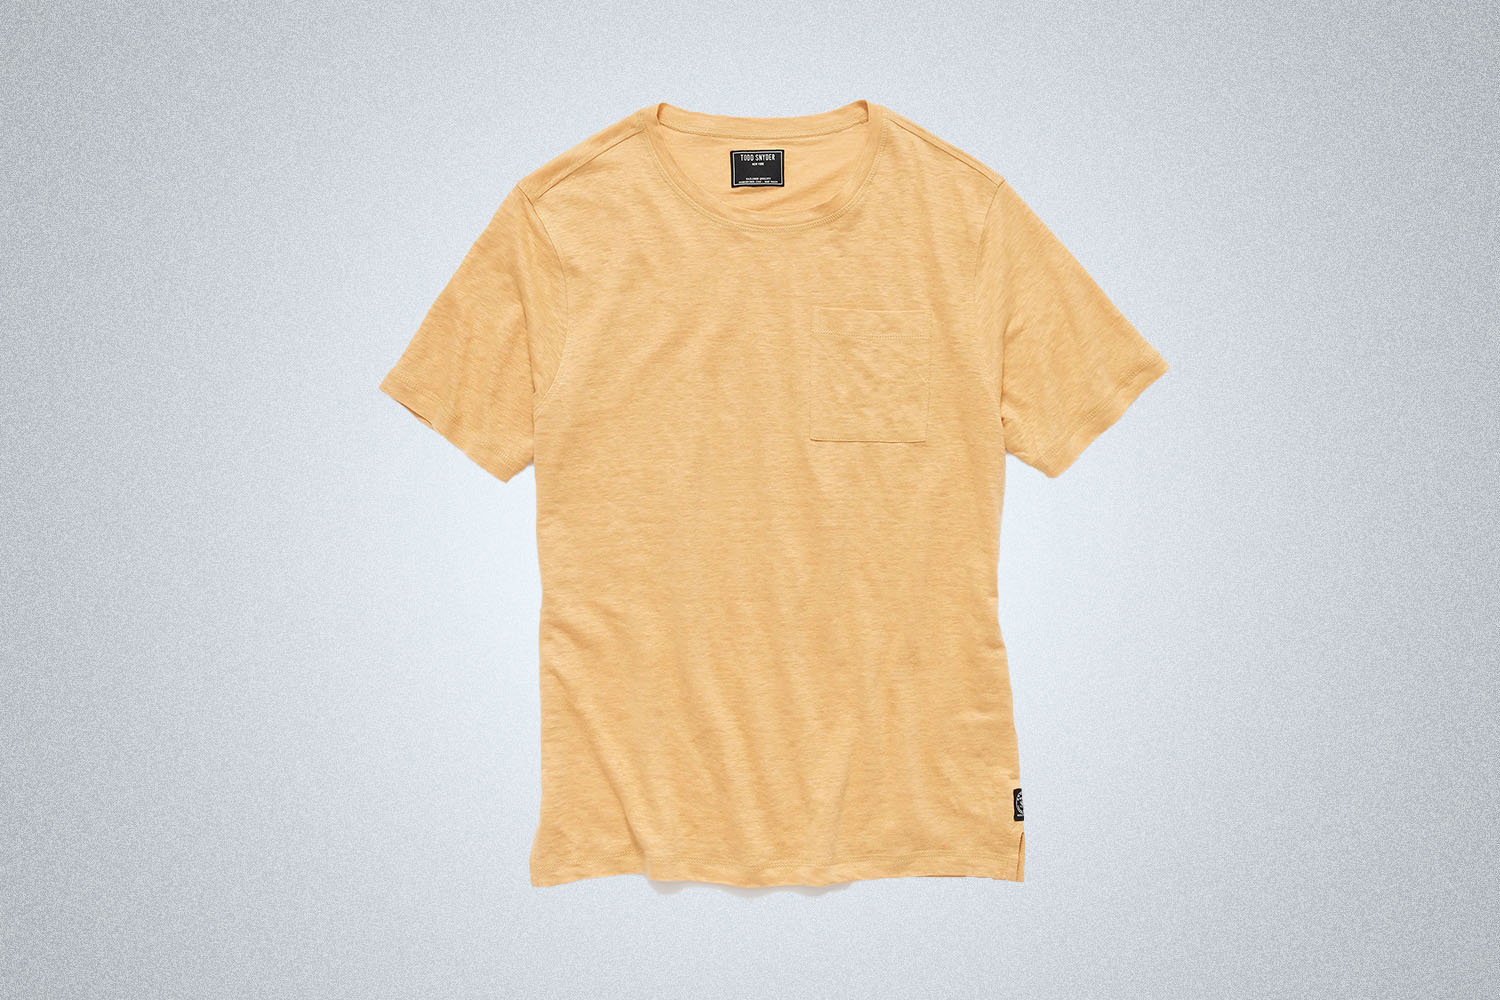 a yellow tee from Todd Snyder on a grey background